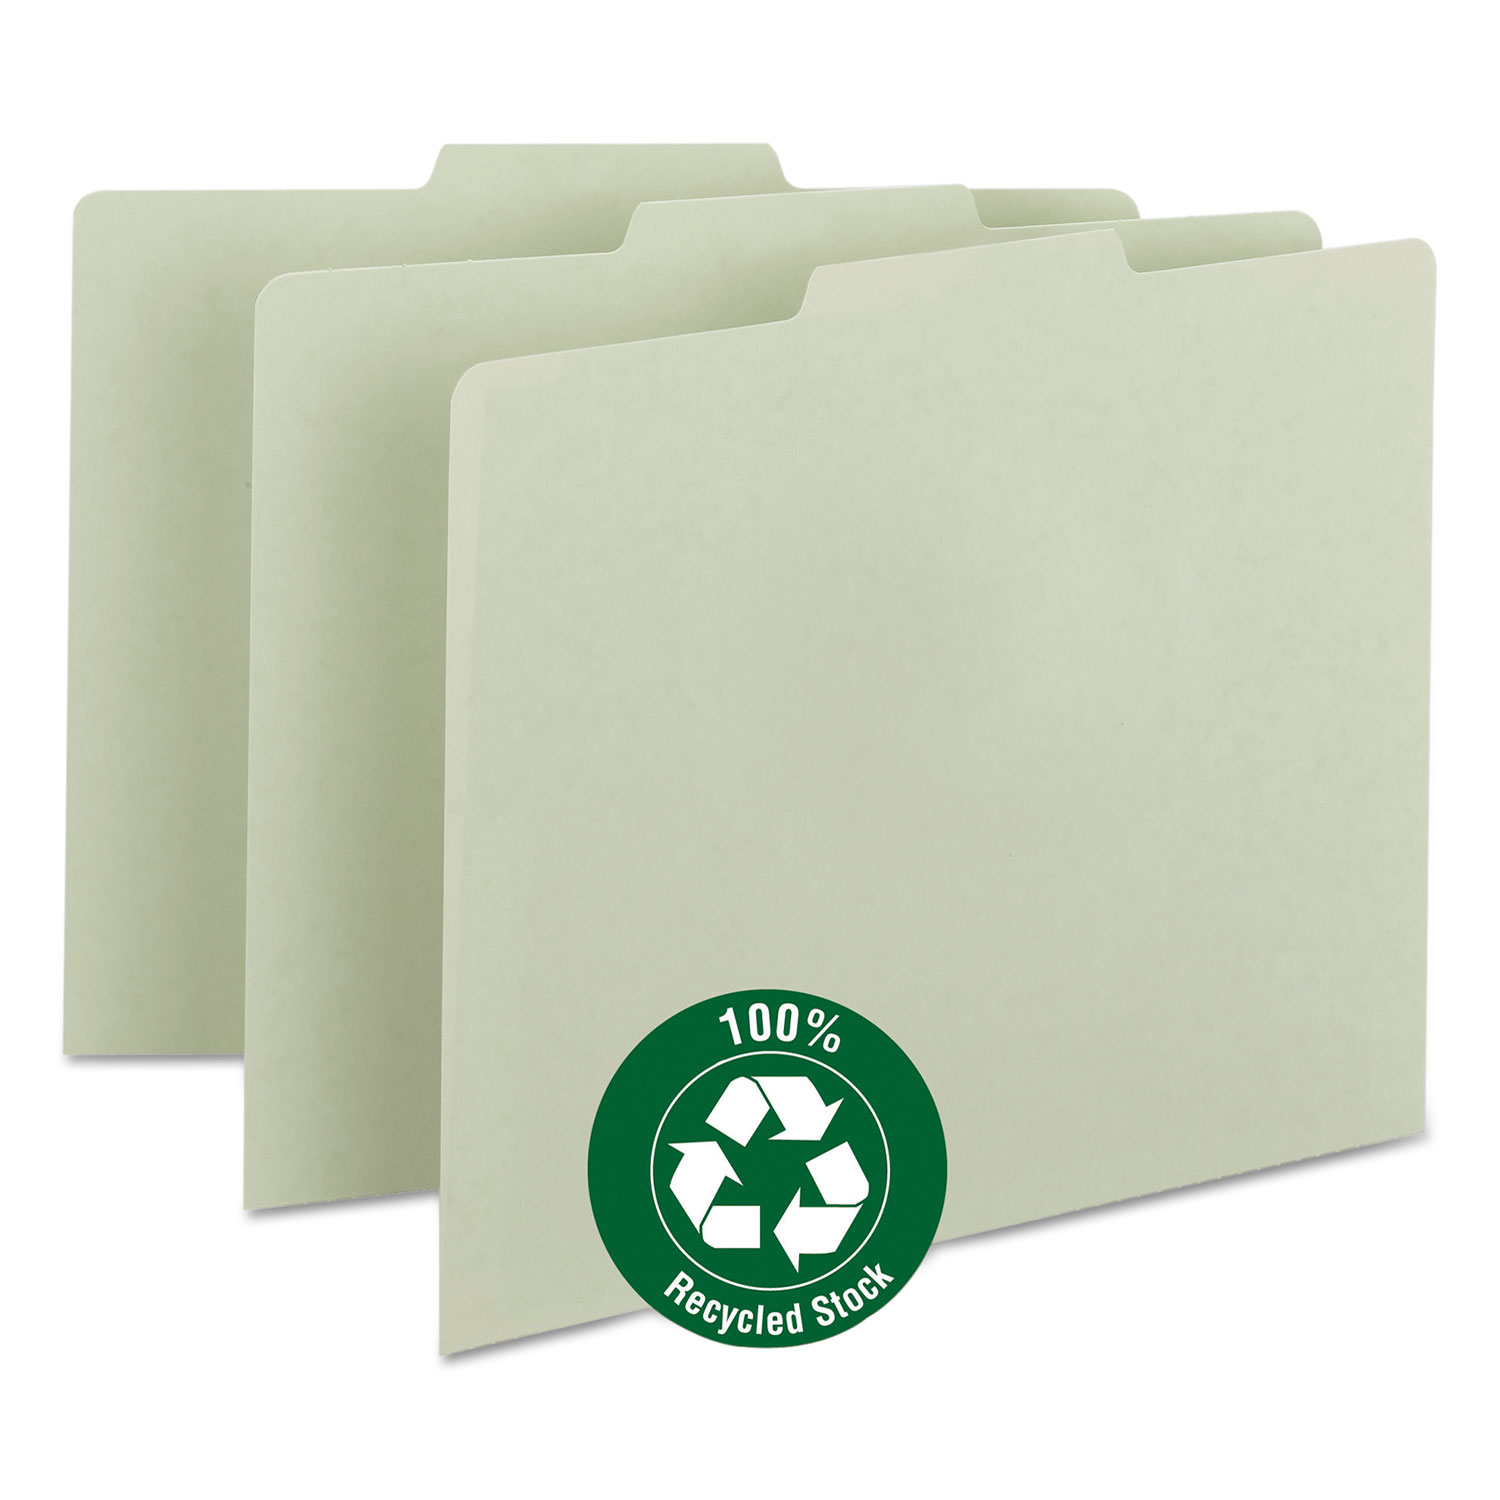  Smead 50334 Recycled Blank Top Tab File Guides, 1/3-Cut Top Tab, Blank, 8.5 x 11, Green, 100/Box (SMD50334) 